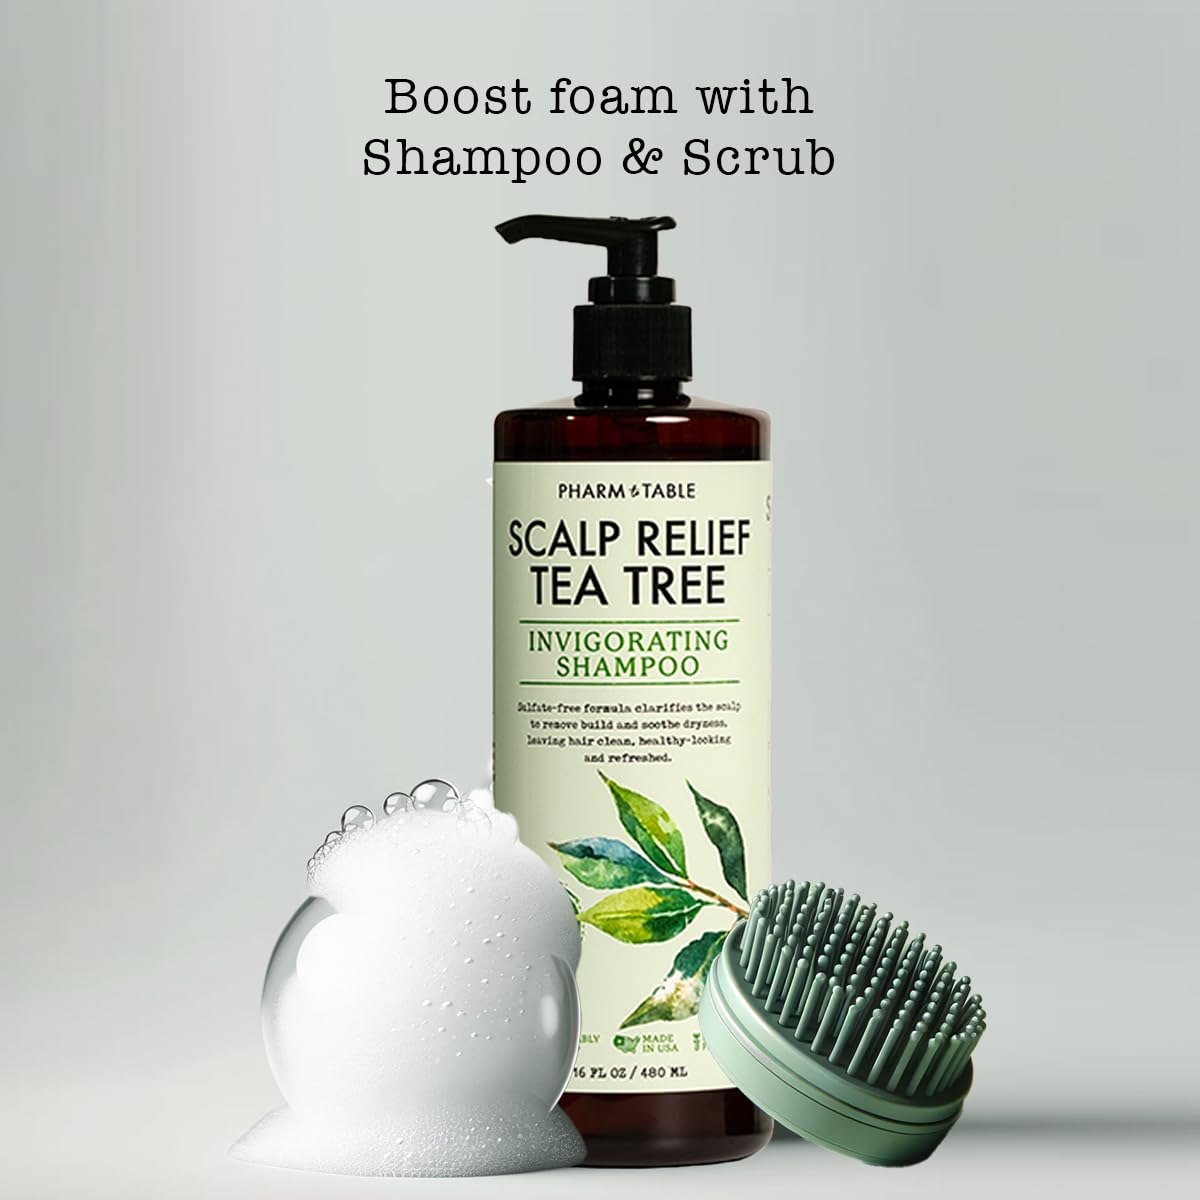 PHARM TO TABLE Tea Tree Shampoo For Men and Women, Deep Cleansing Sulfate-Free Formula - Relief for Dry Itchy Scalp - Infused with Tea Tree oil, Mint, Biotin and Vitamin E, 16.2oz